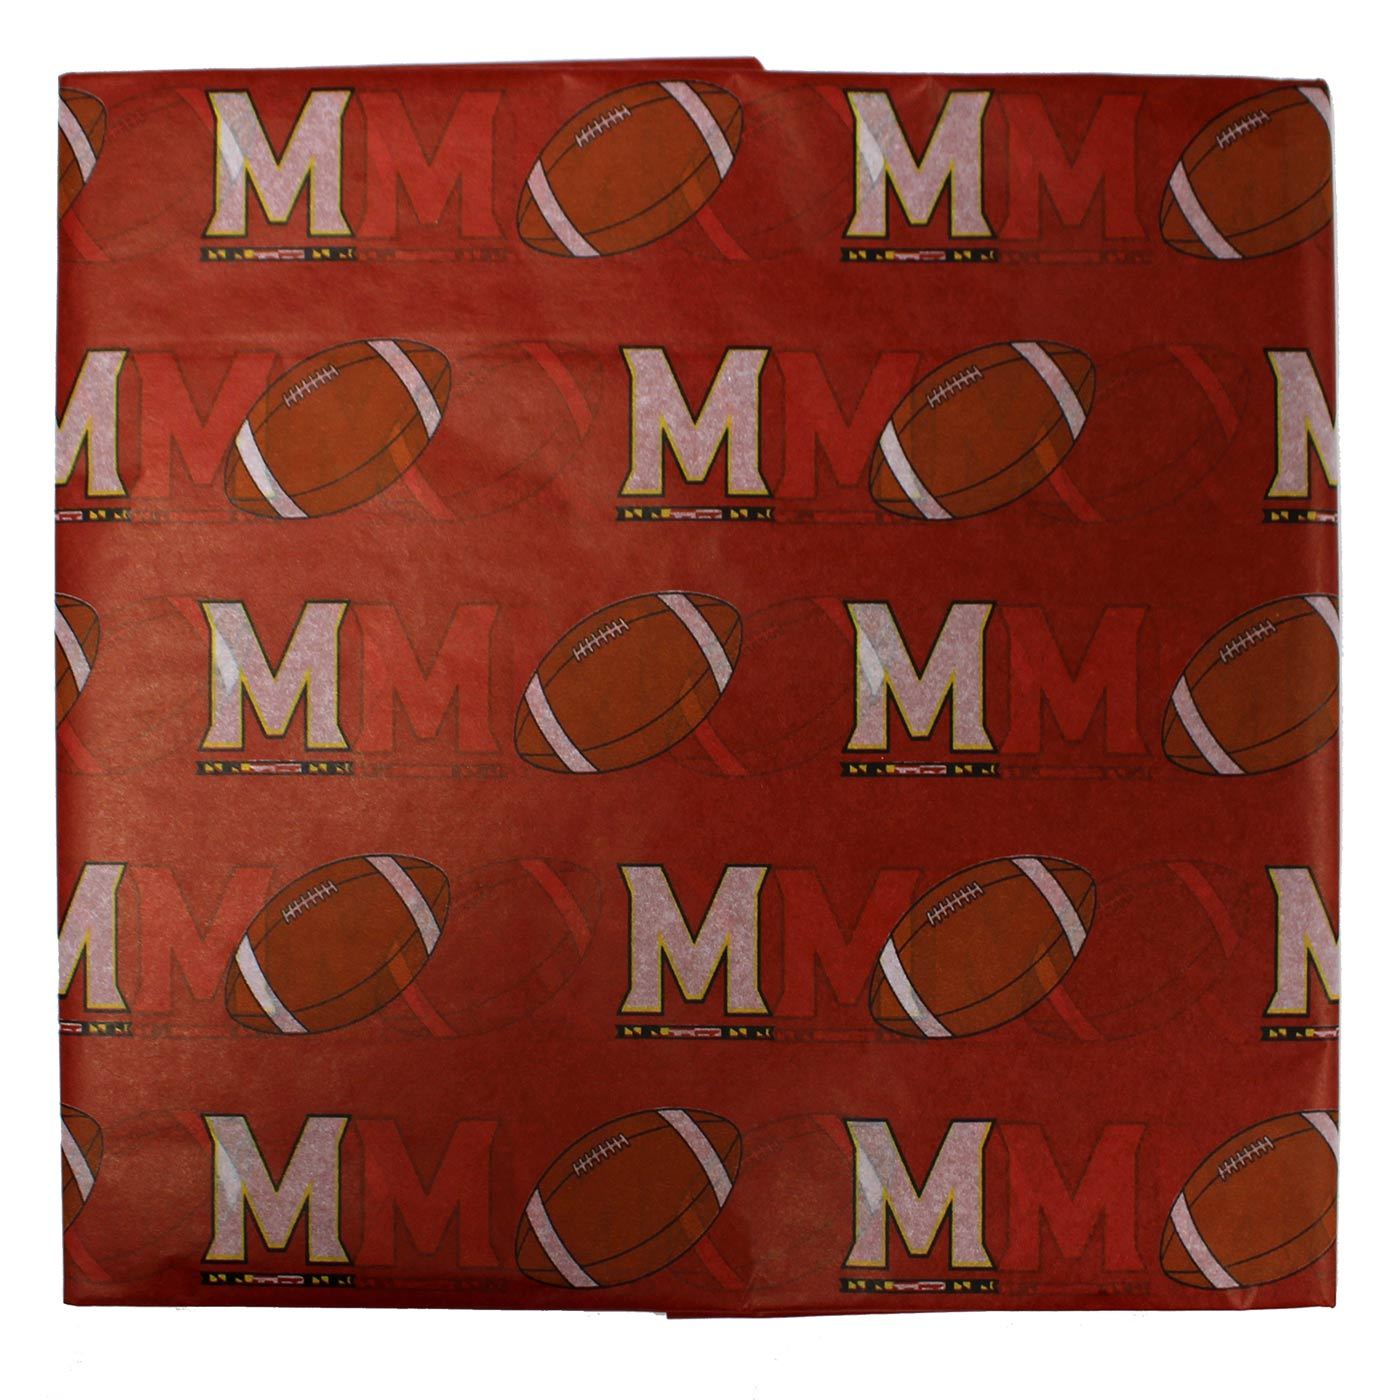 UMD Football and "M" Logo Pattern / Tissue Paper Pack - Route One Apparel